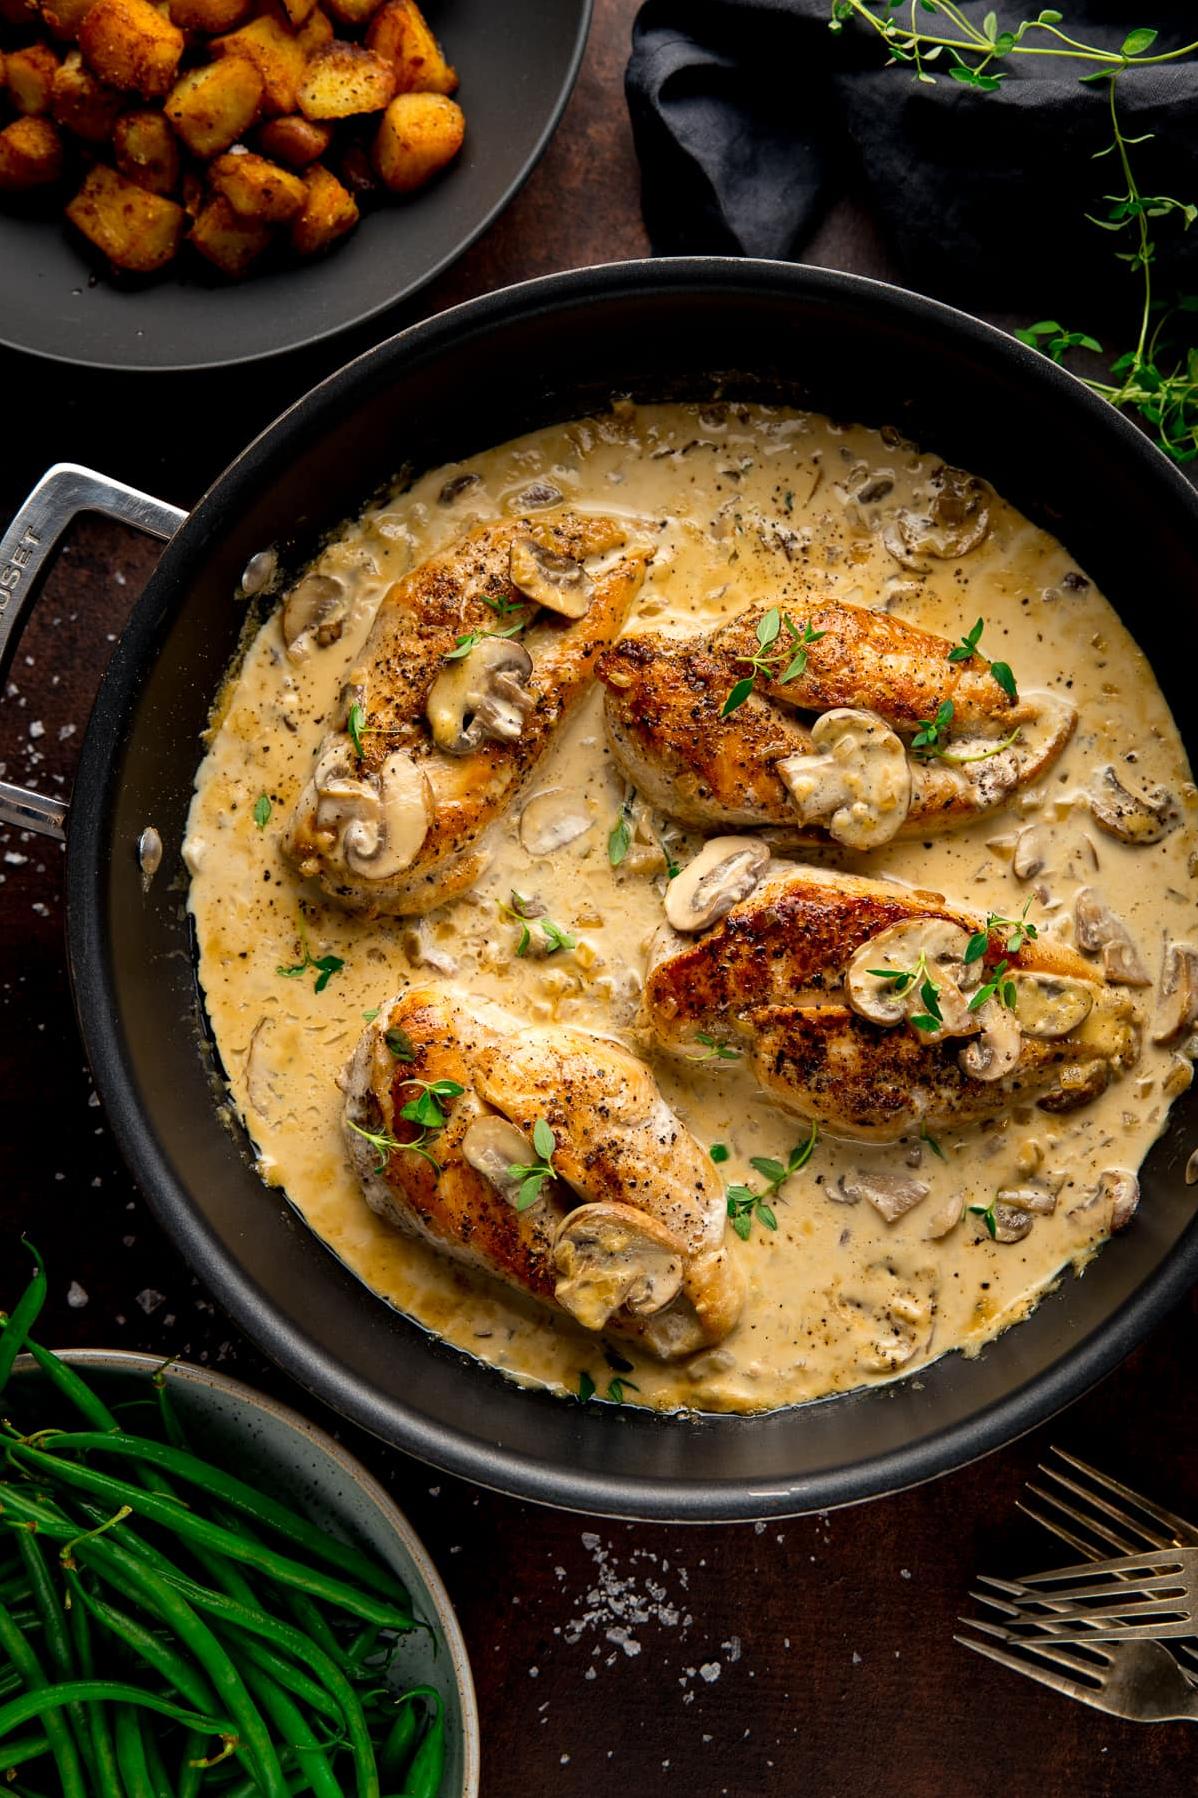  Simmered in white wine, this chicken gets tender and juicy